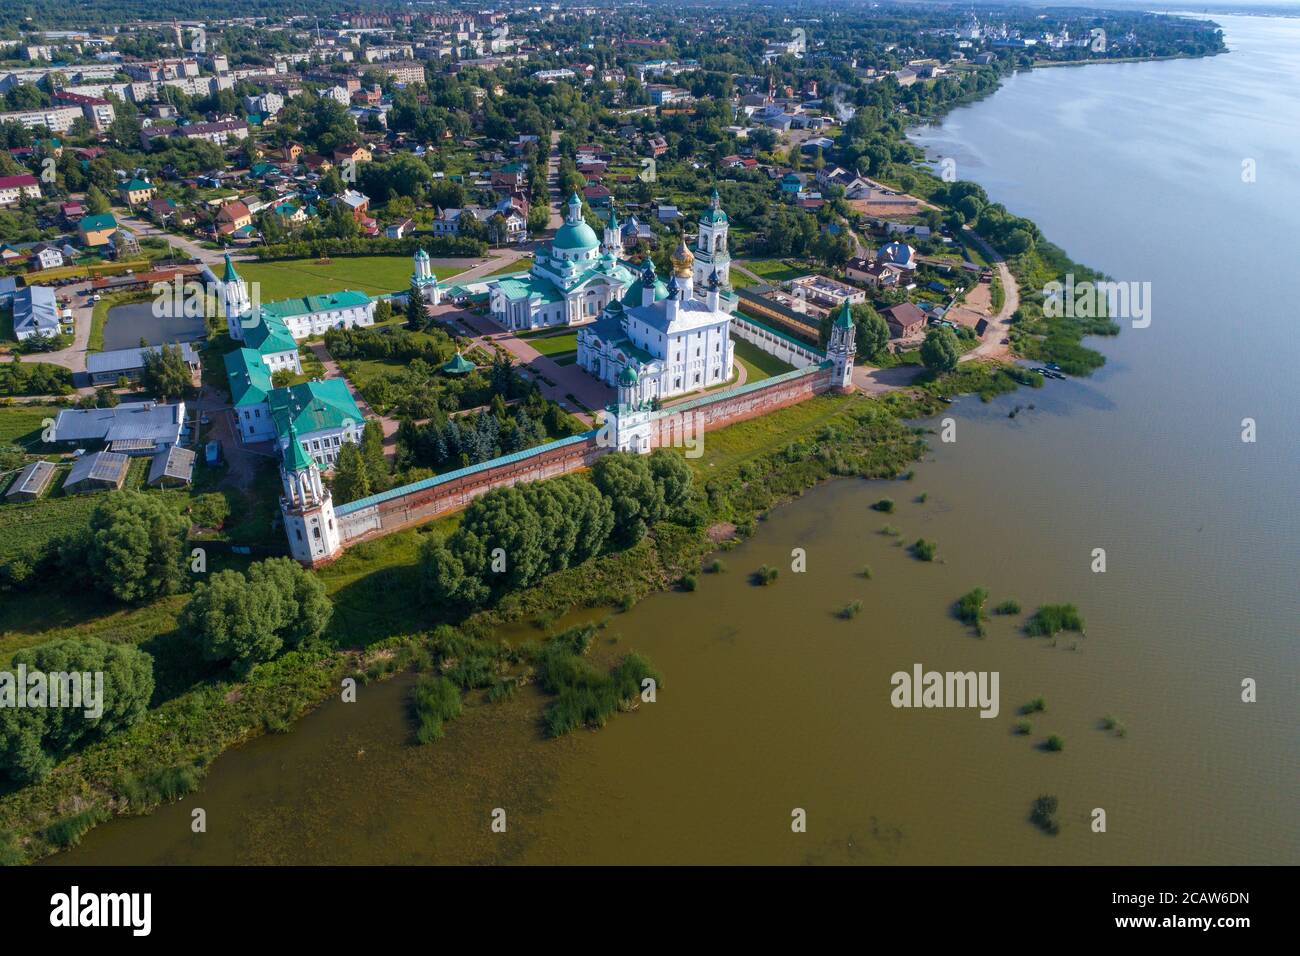 Aerial view of the Spaso-Yakovlevsky Dmitrovsky Monastery on a July afternoon (aerial photo). Rostov great, Golden Ring of Russia Stock Photo